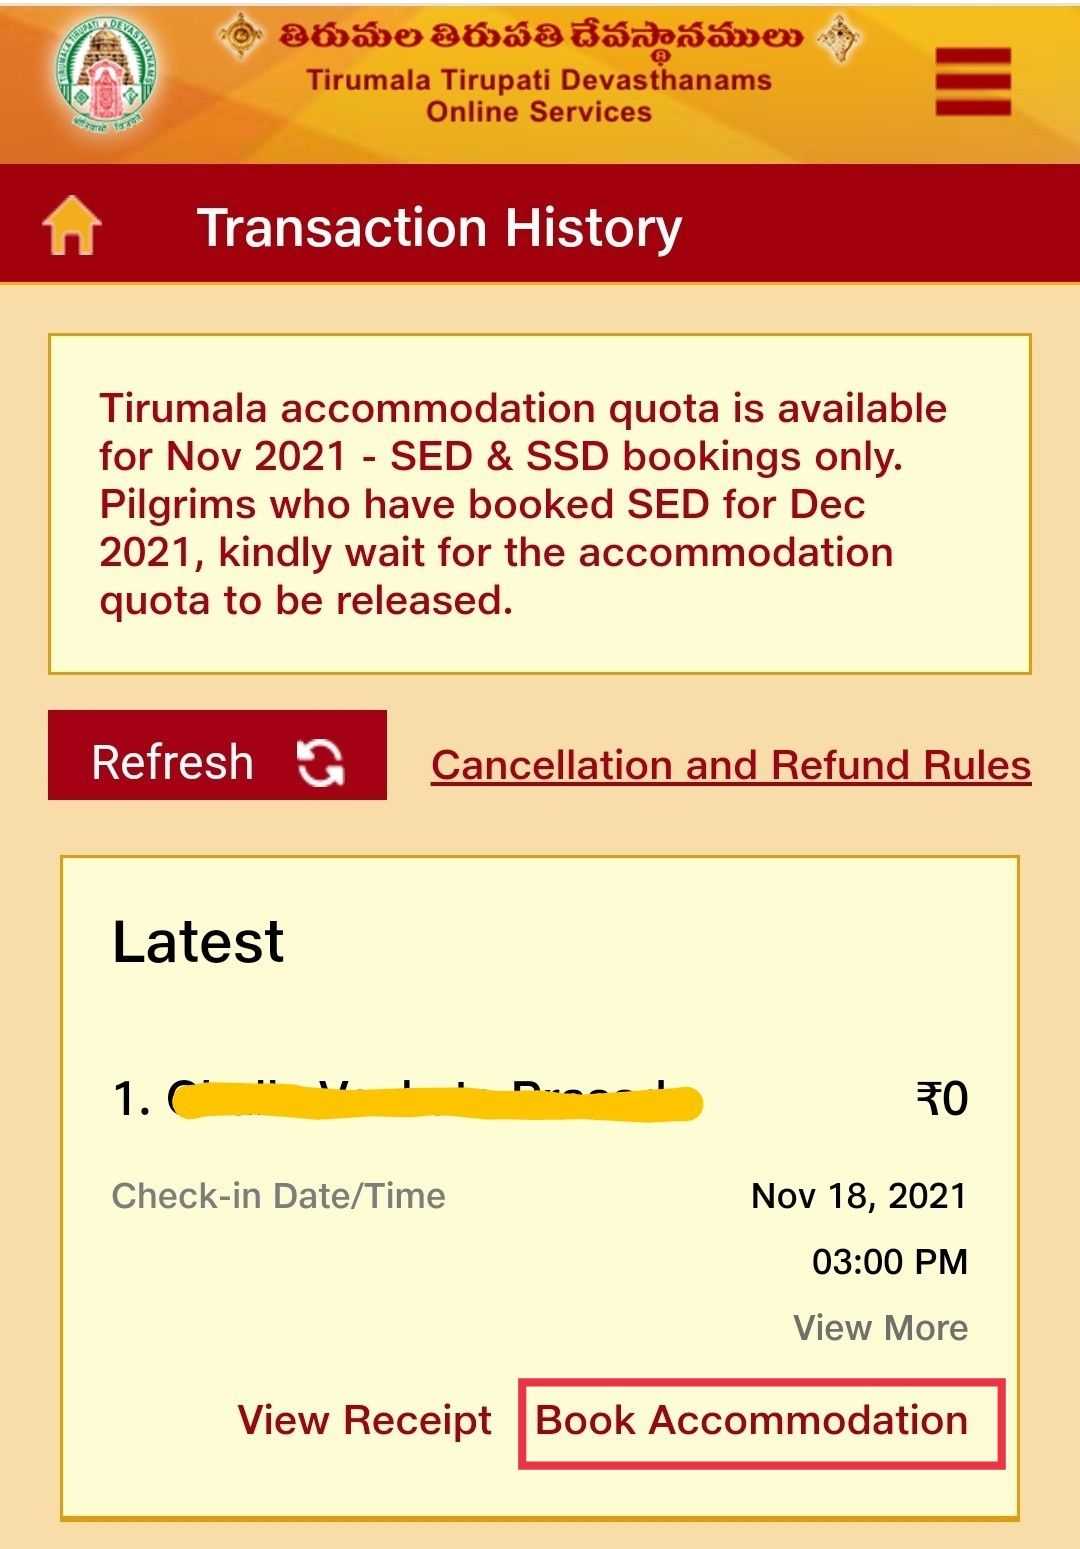 Download ticket from transaction history - Continued